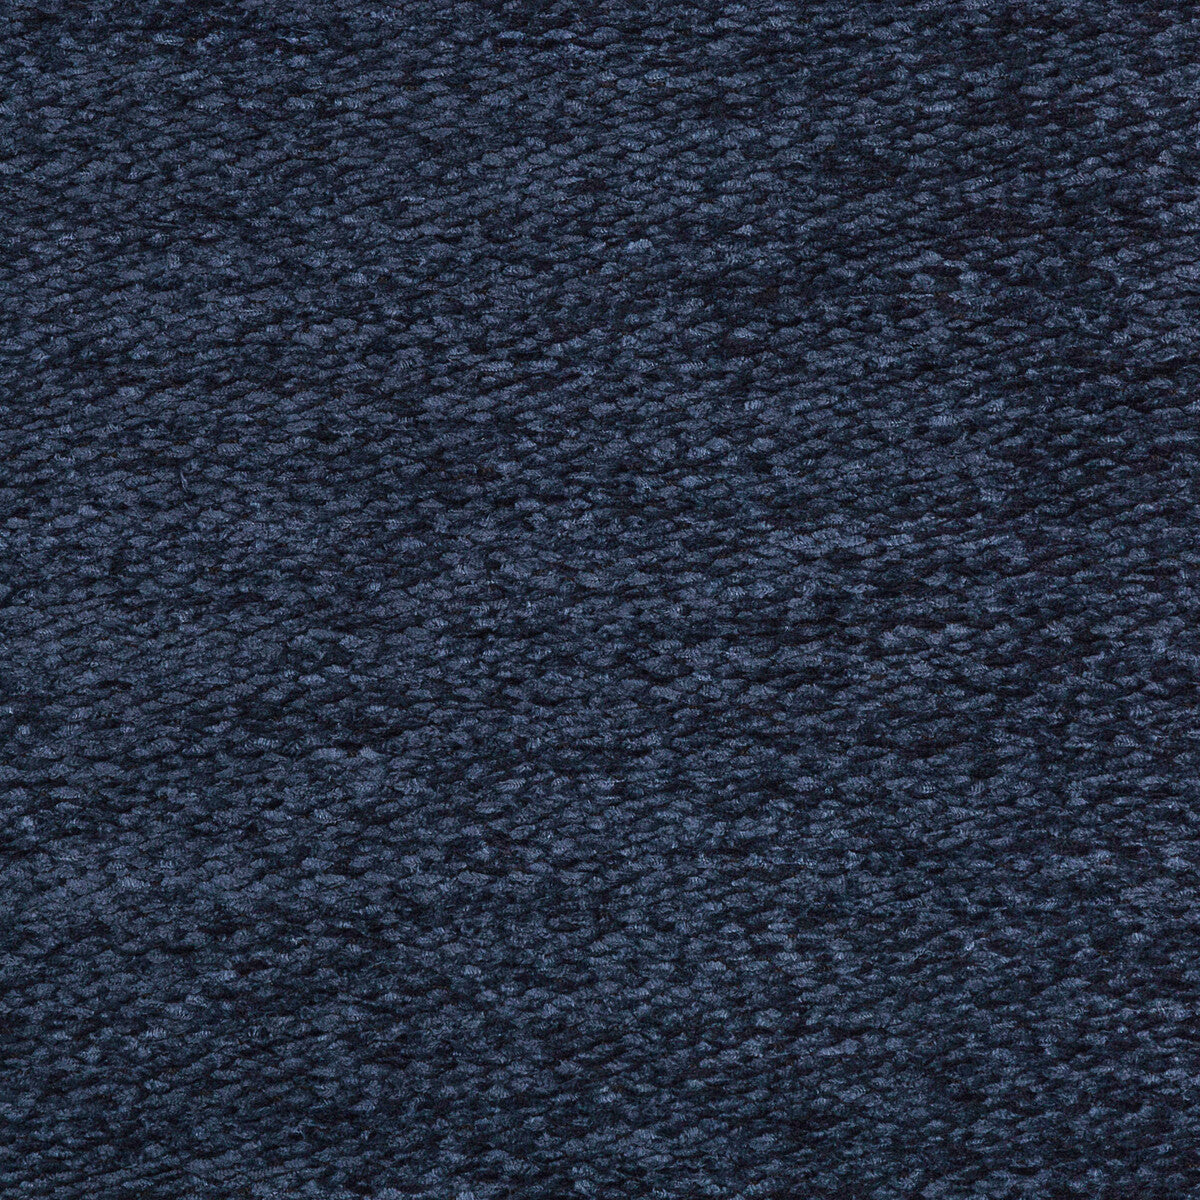 Clery Texture fabric in navy color - pattern 8019150.50.0 - by Brunschwig &amp; Fils in the Chambery Textures II collection